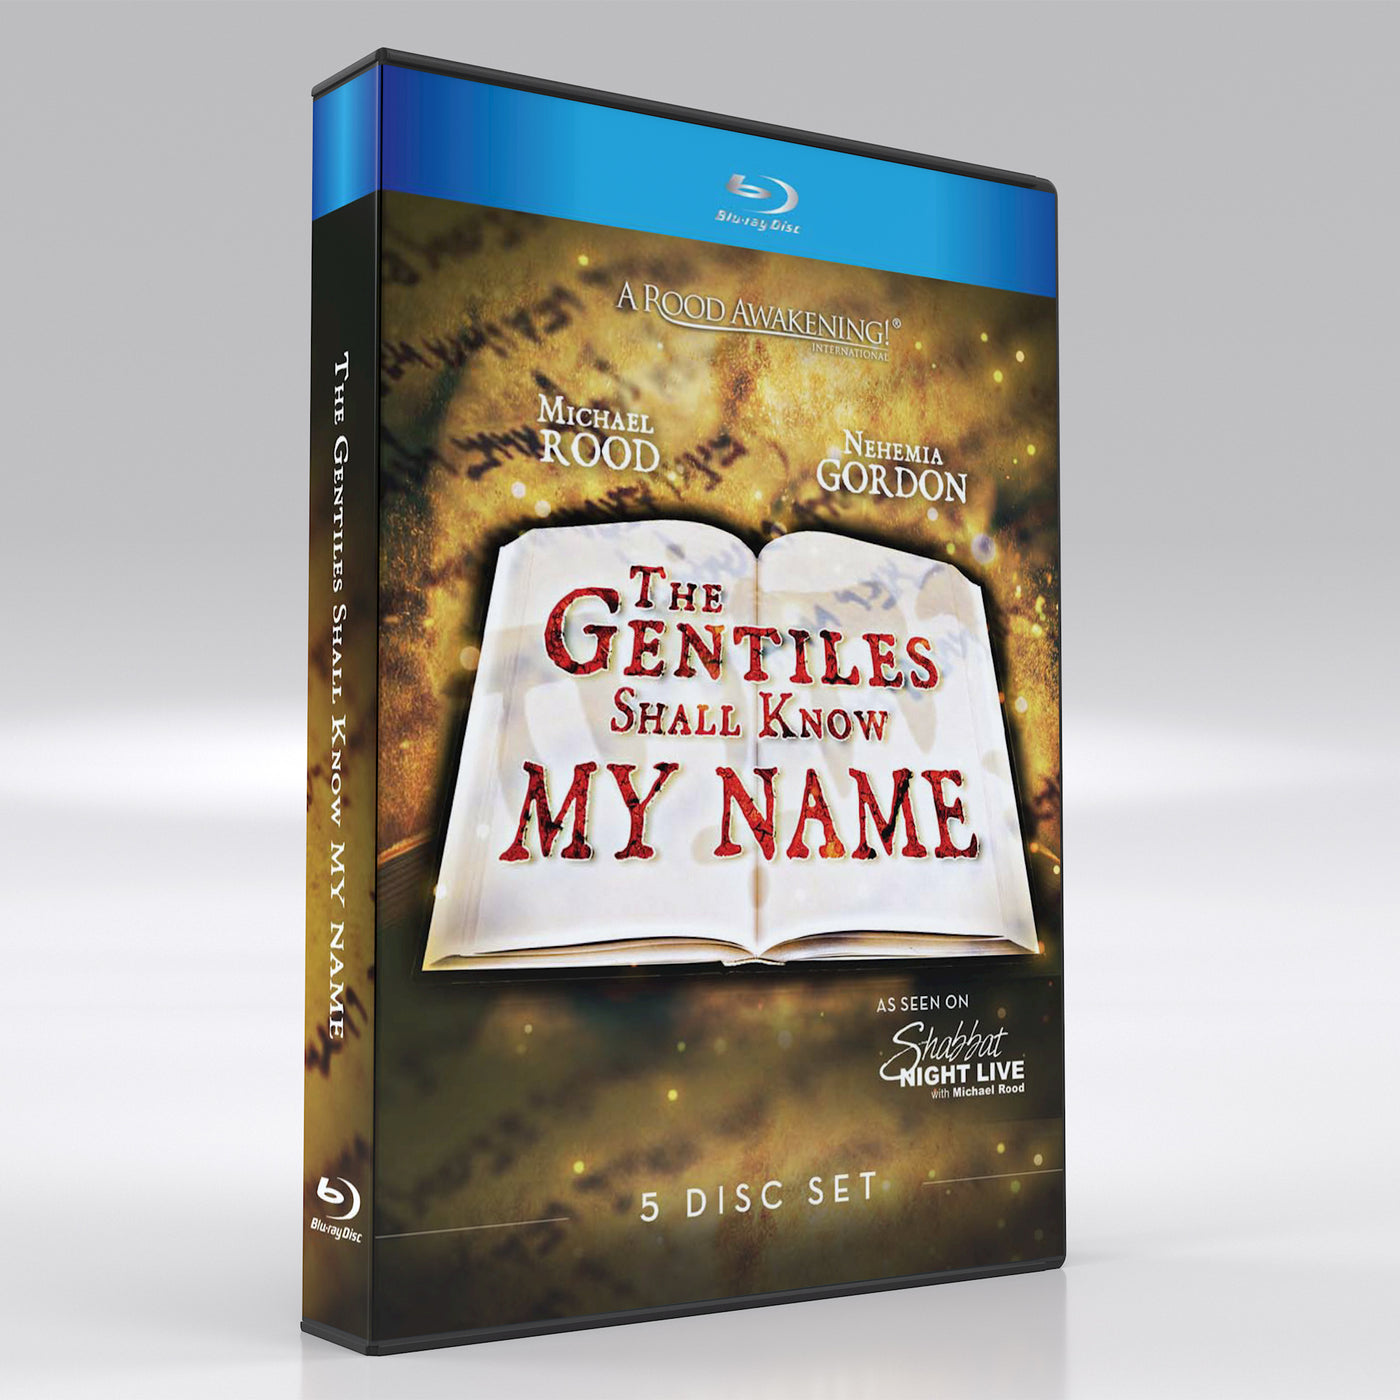 "The Gentiles Shall Know My Name" with Michael Rood and Nehemia Gordon